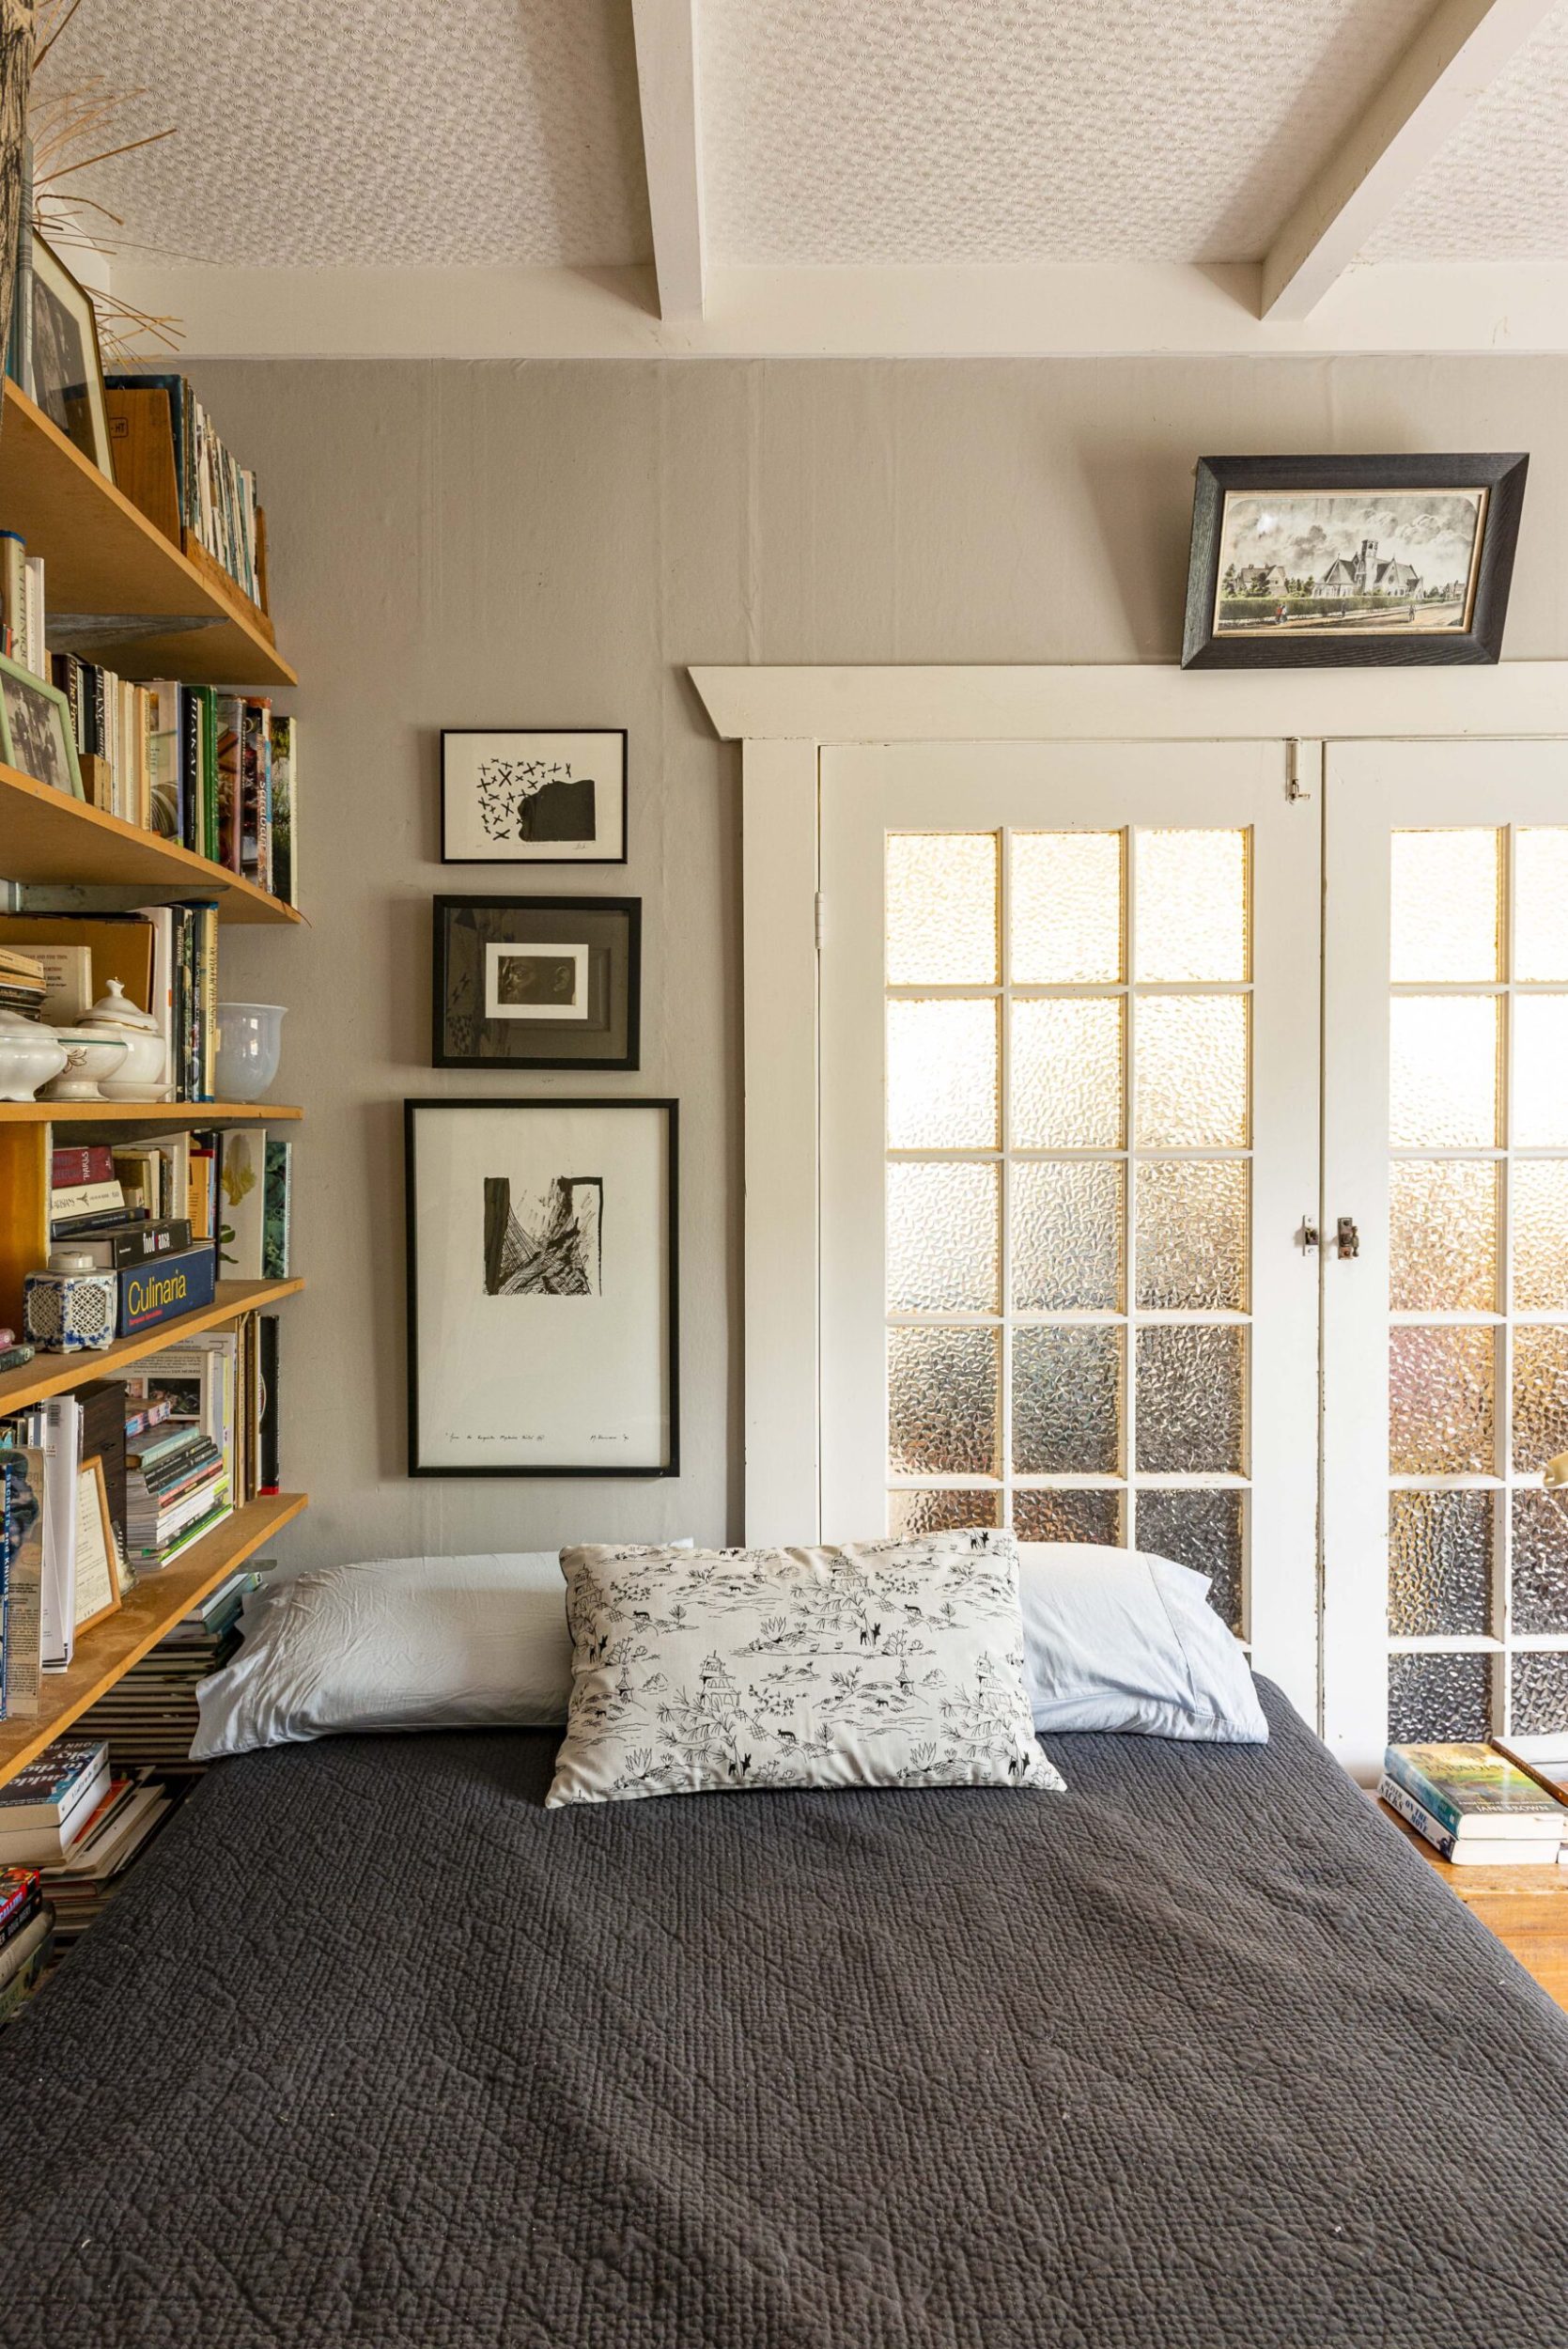 A grey room with white French doors and shelves filled with books